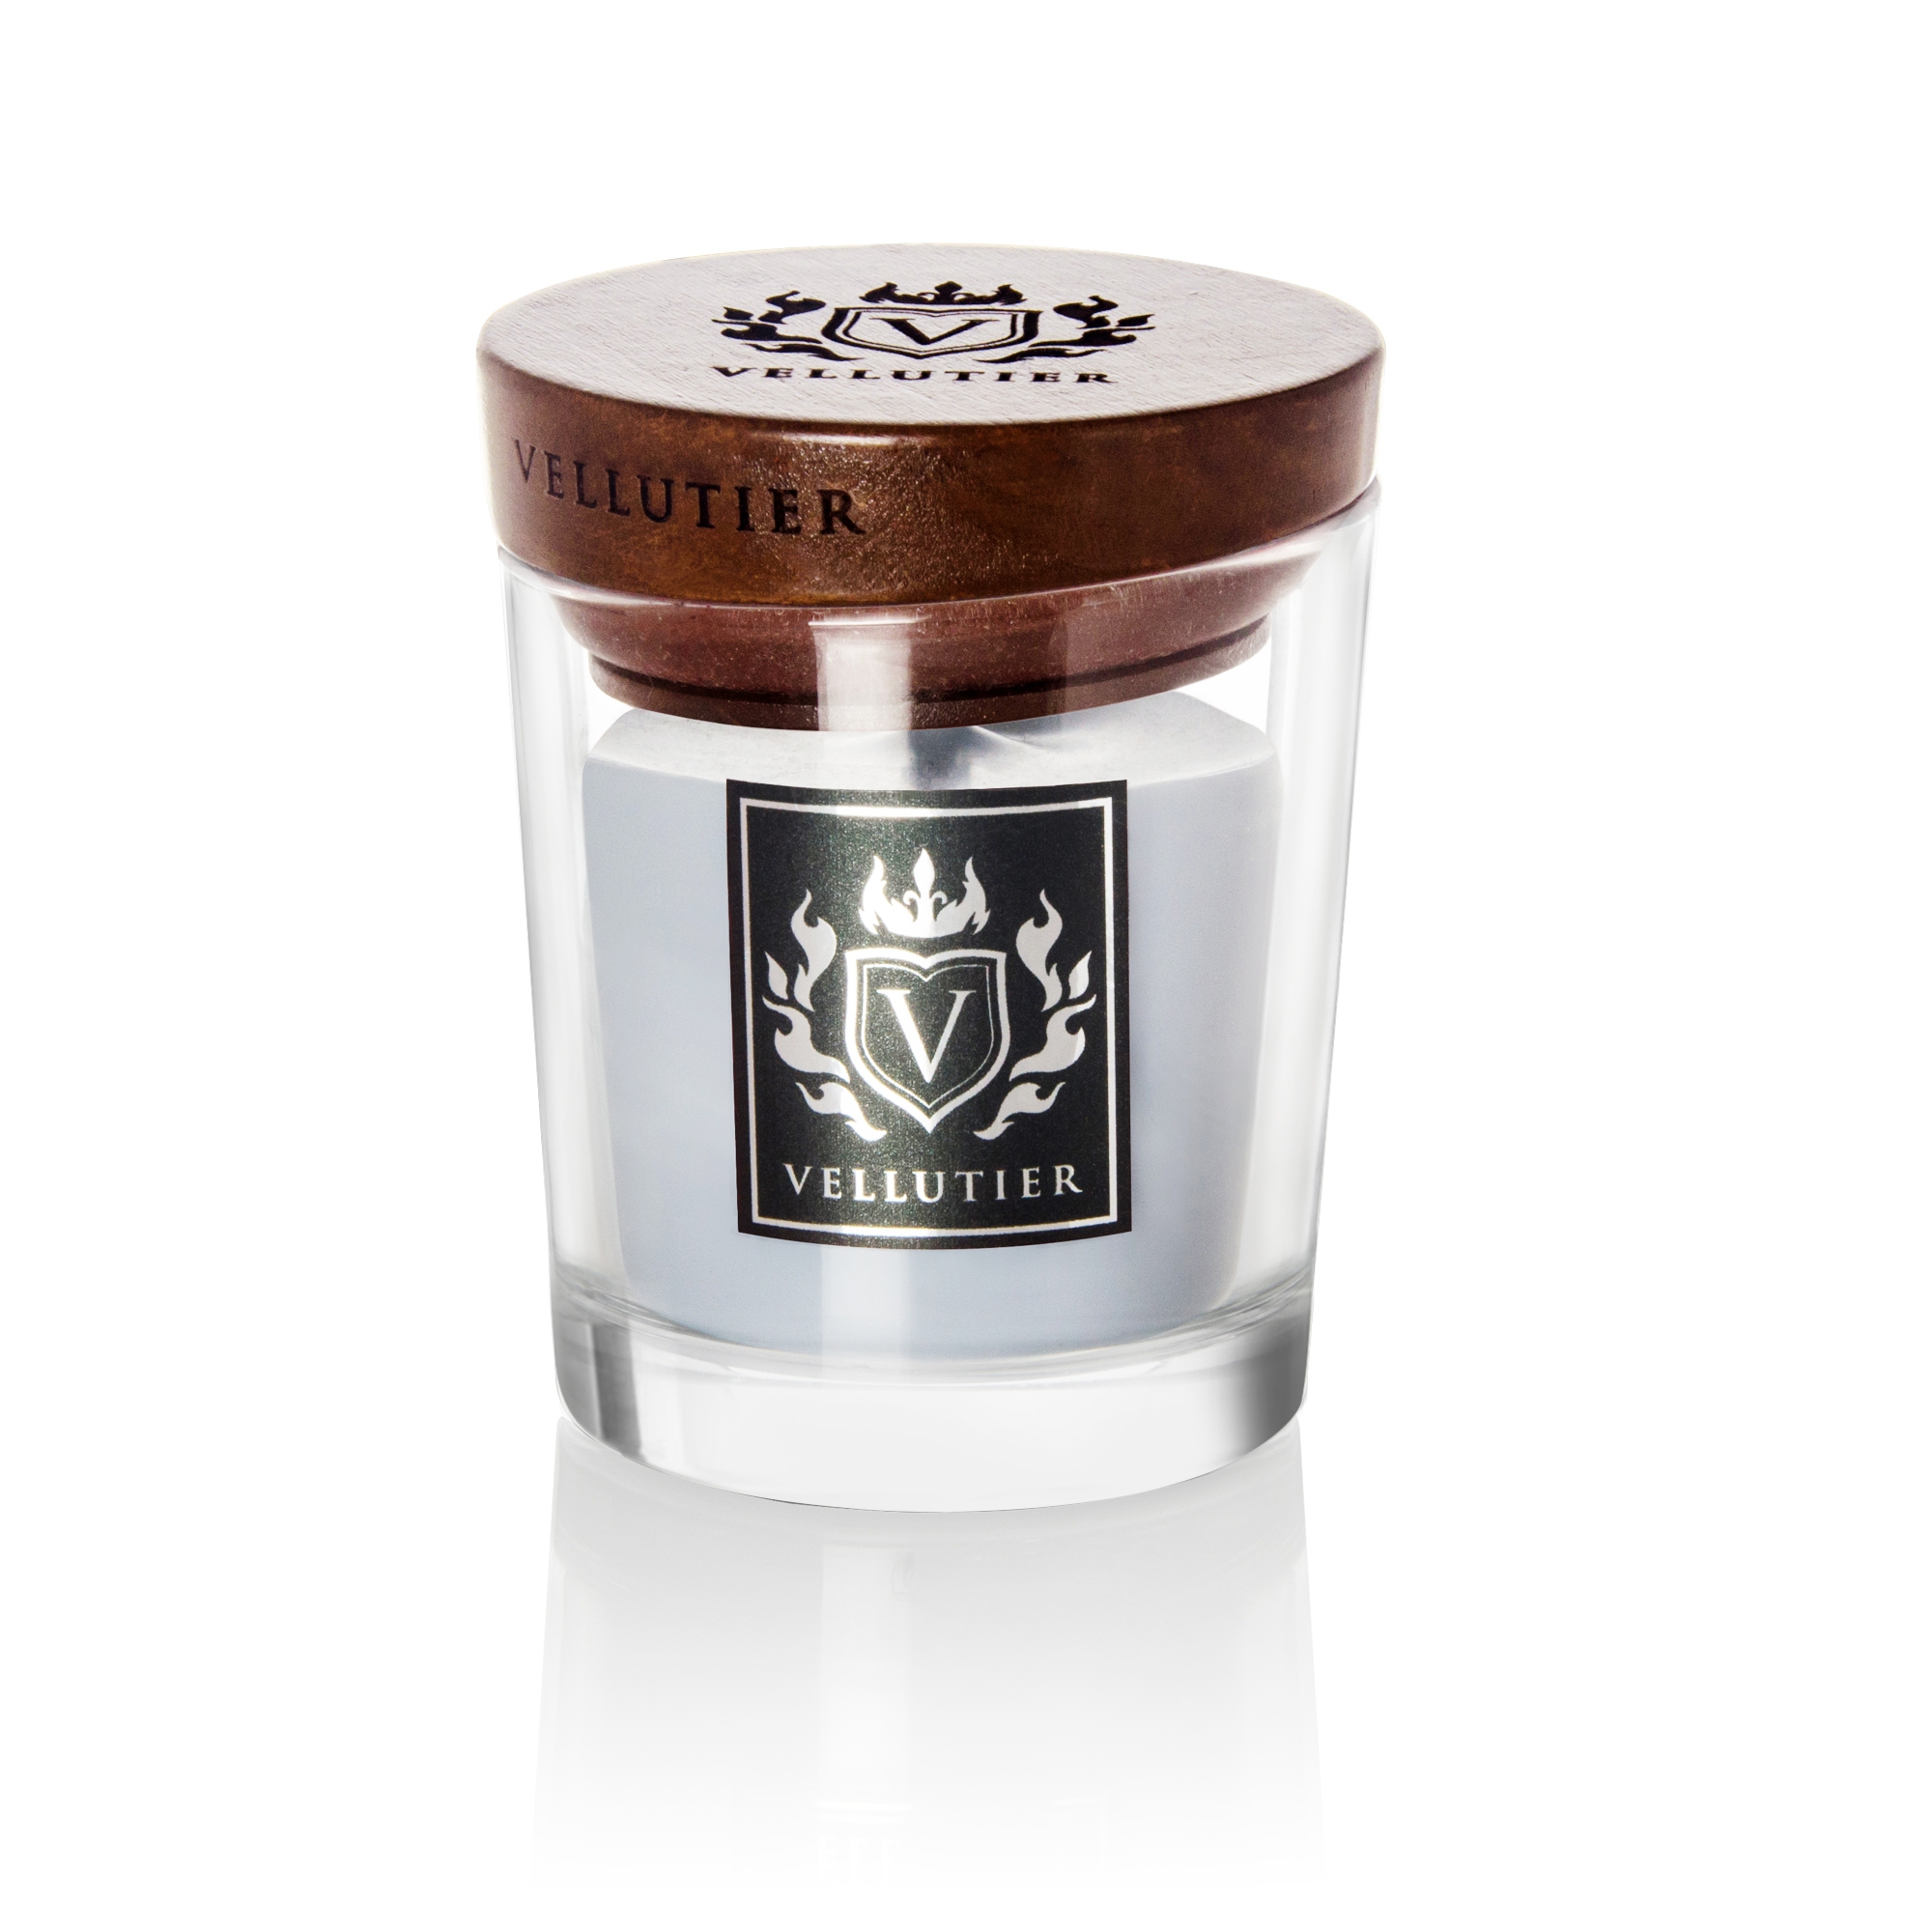 After the Storm Small Bougie Parfumée Exclusif 370g